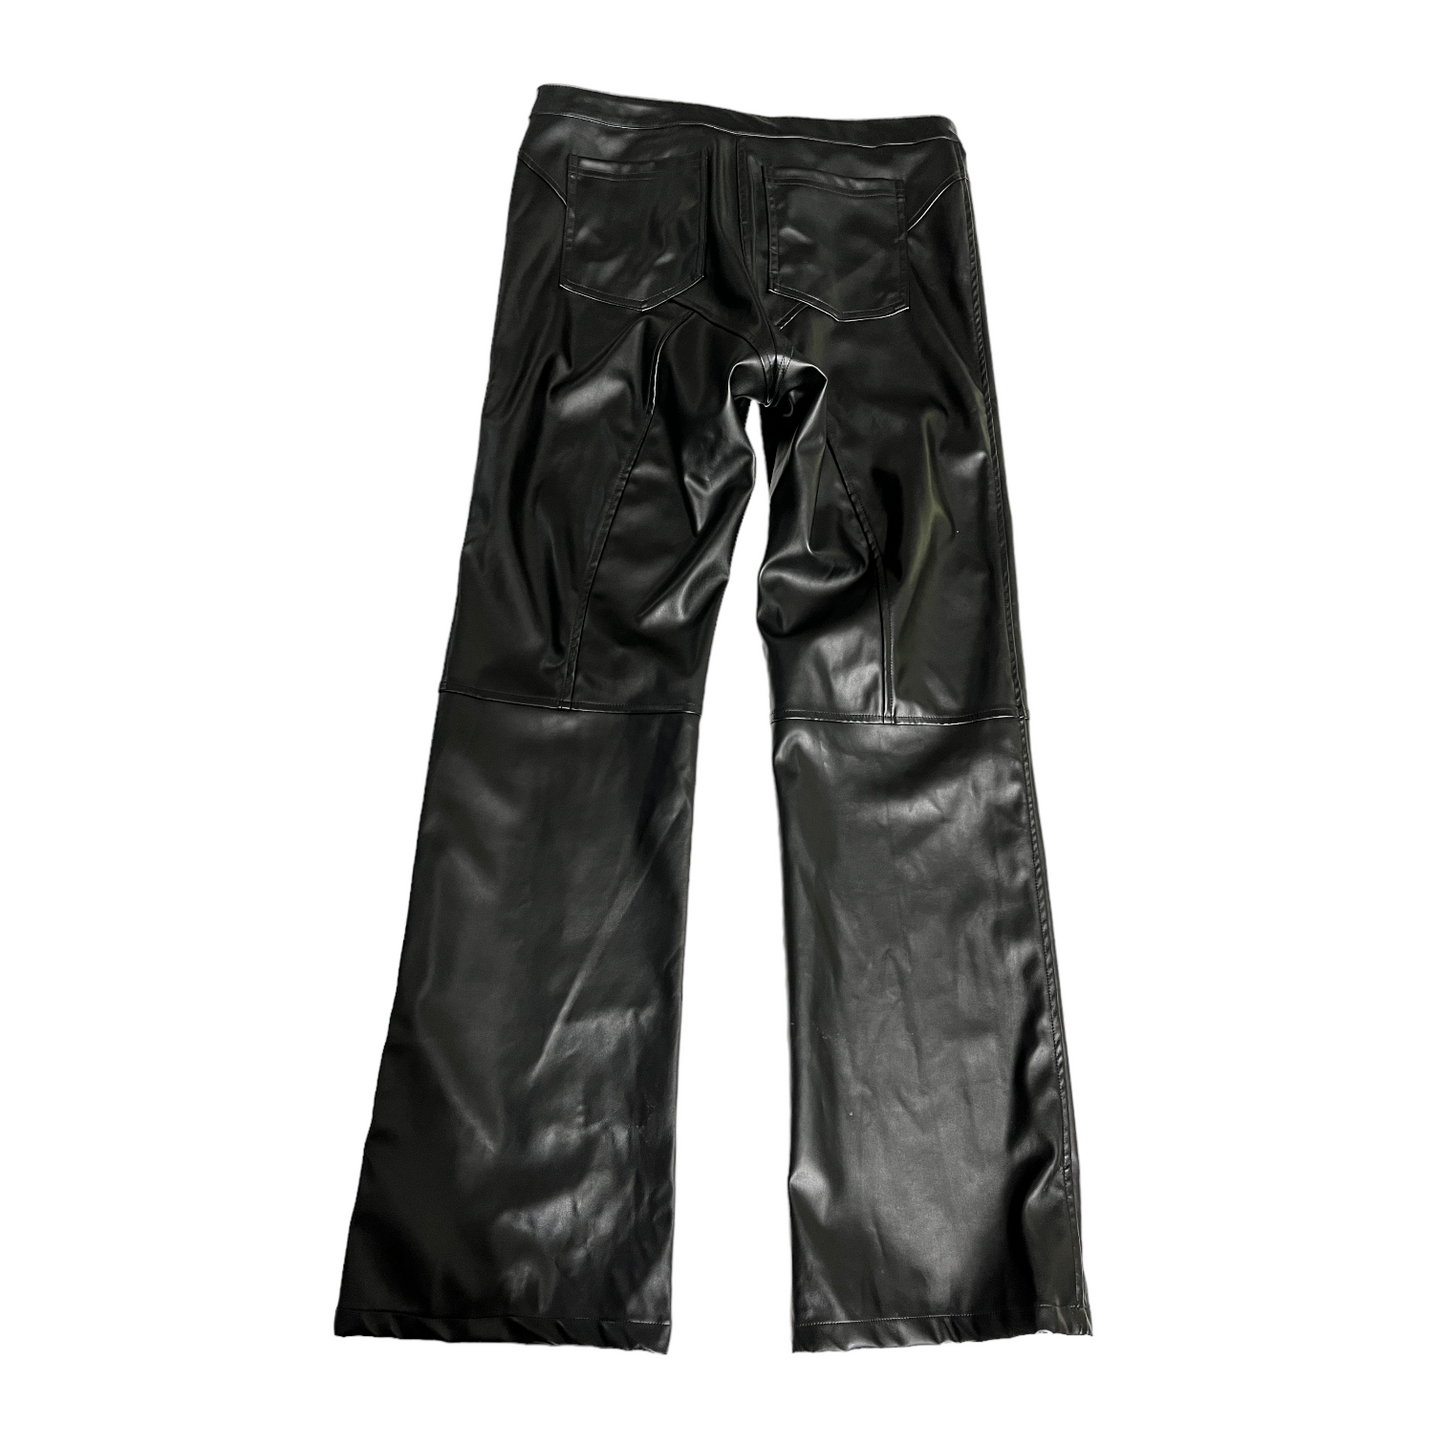 EB Denim Faux Leather Lace Up Pants in Black